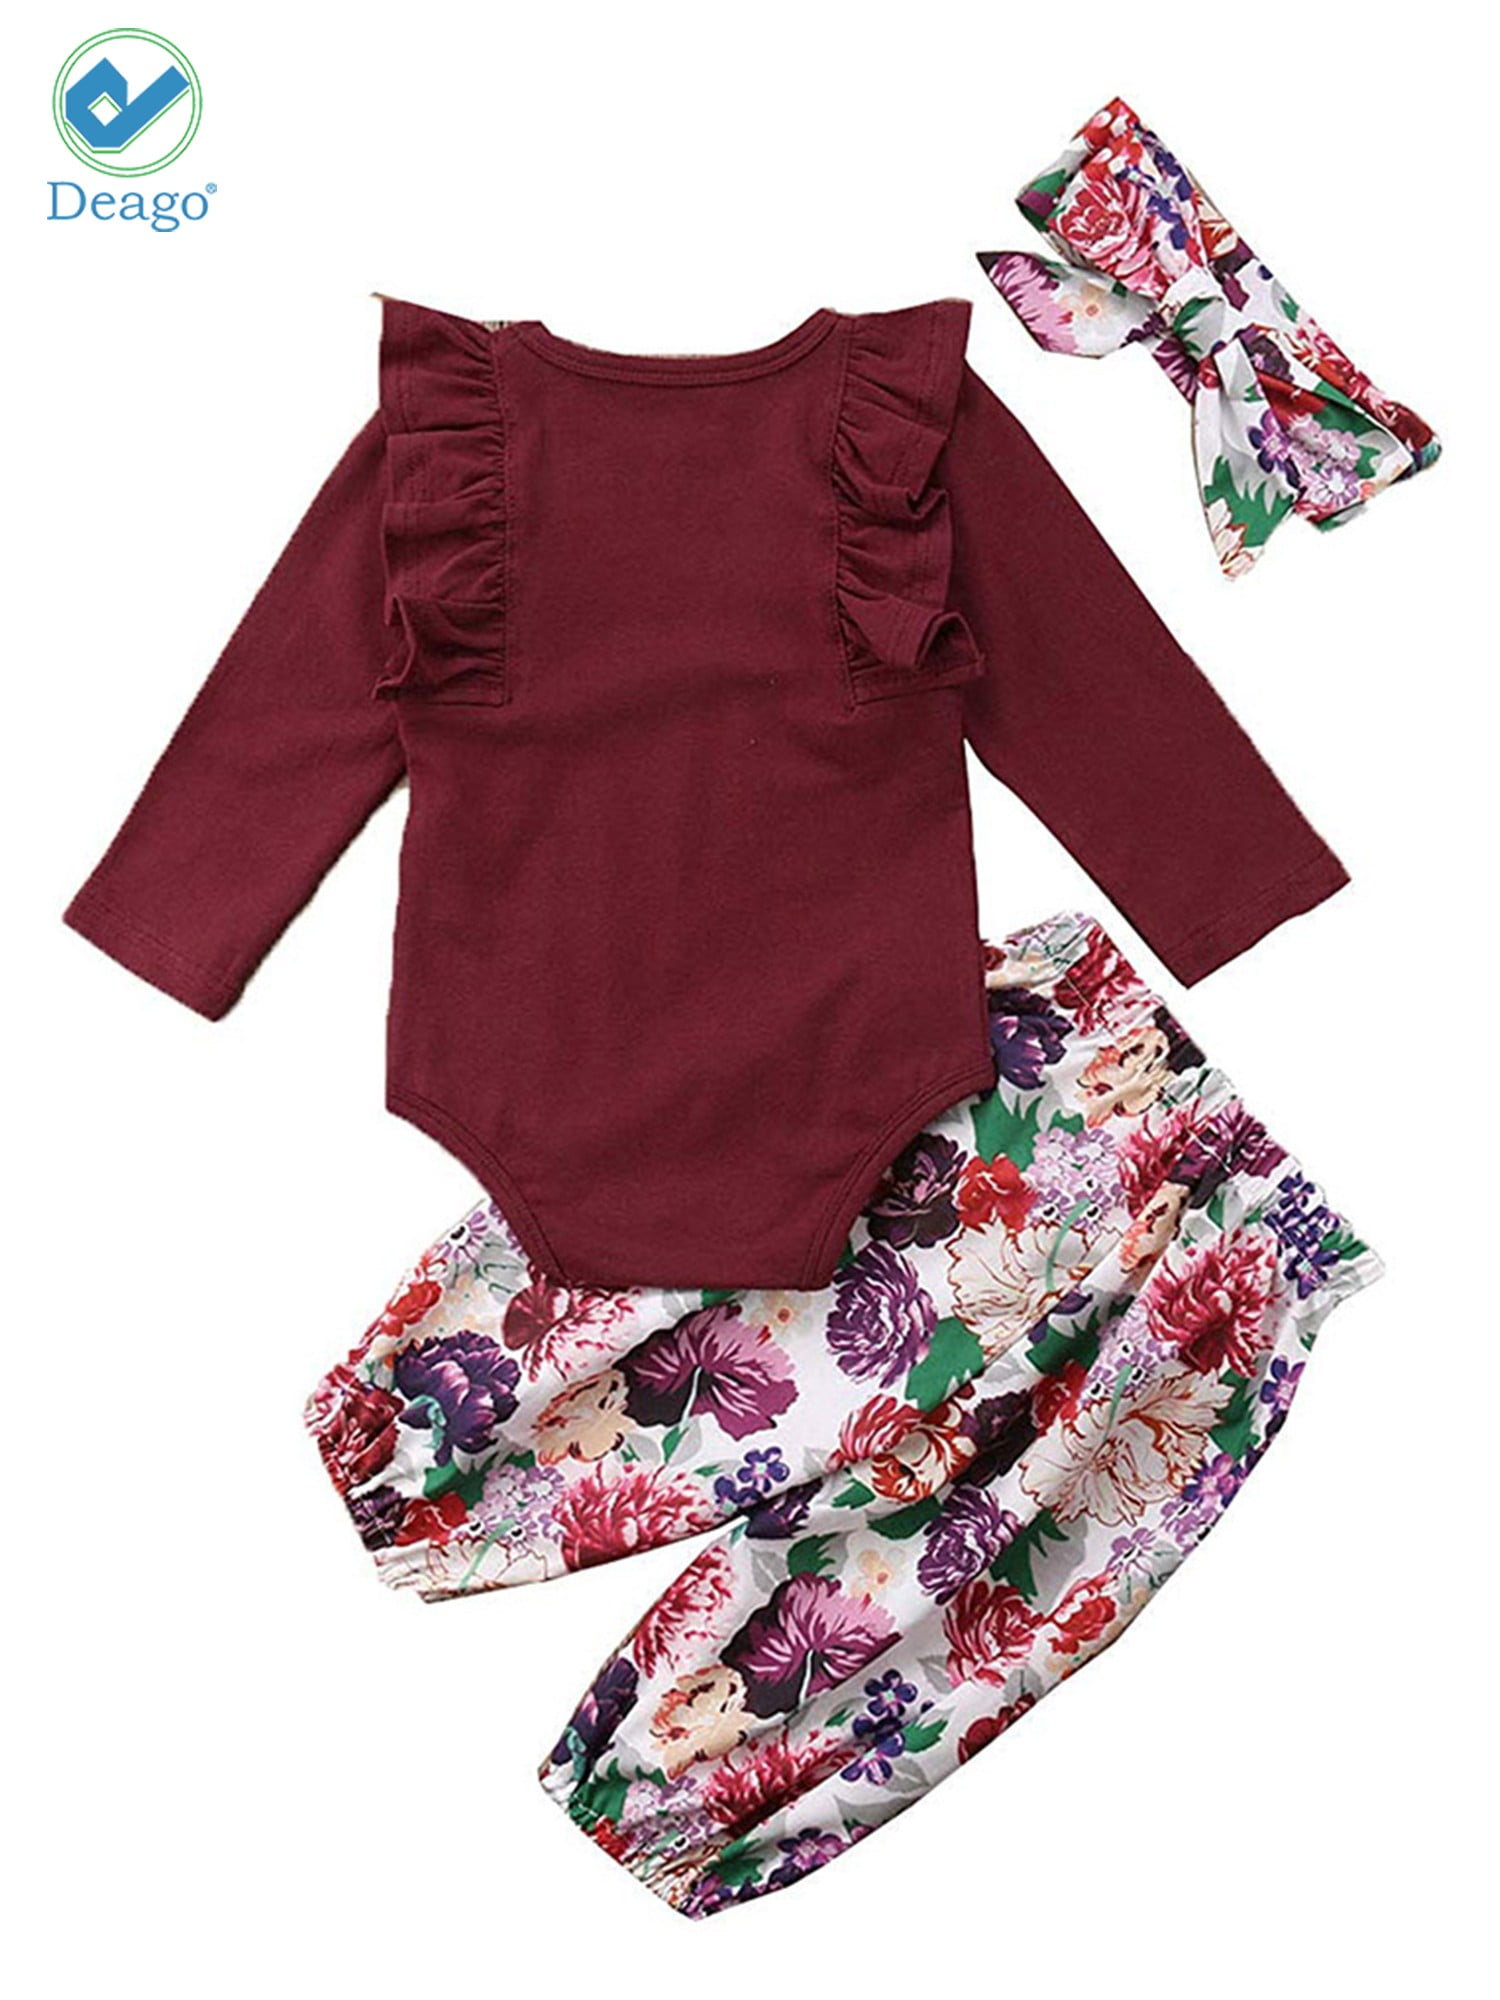 Baby girl clothes Tops&pants 2Pcs Outfits cotton spring fall tracksuit flower 